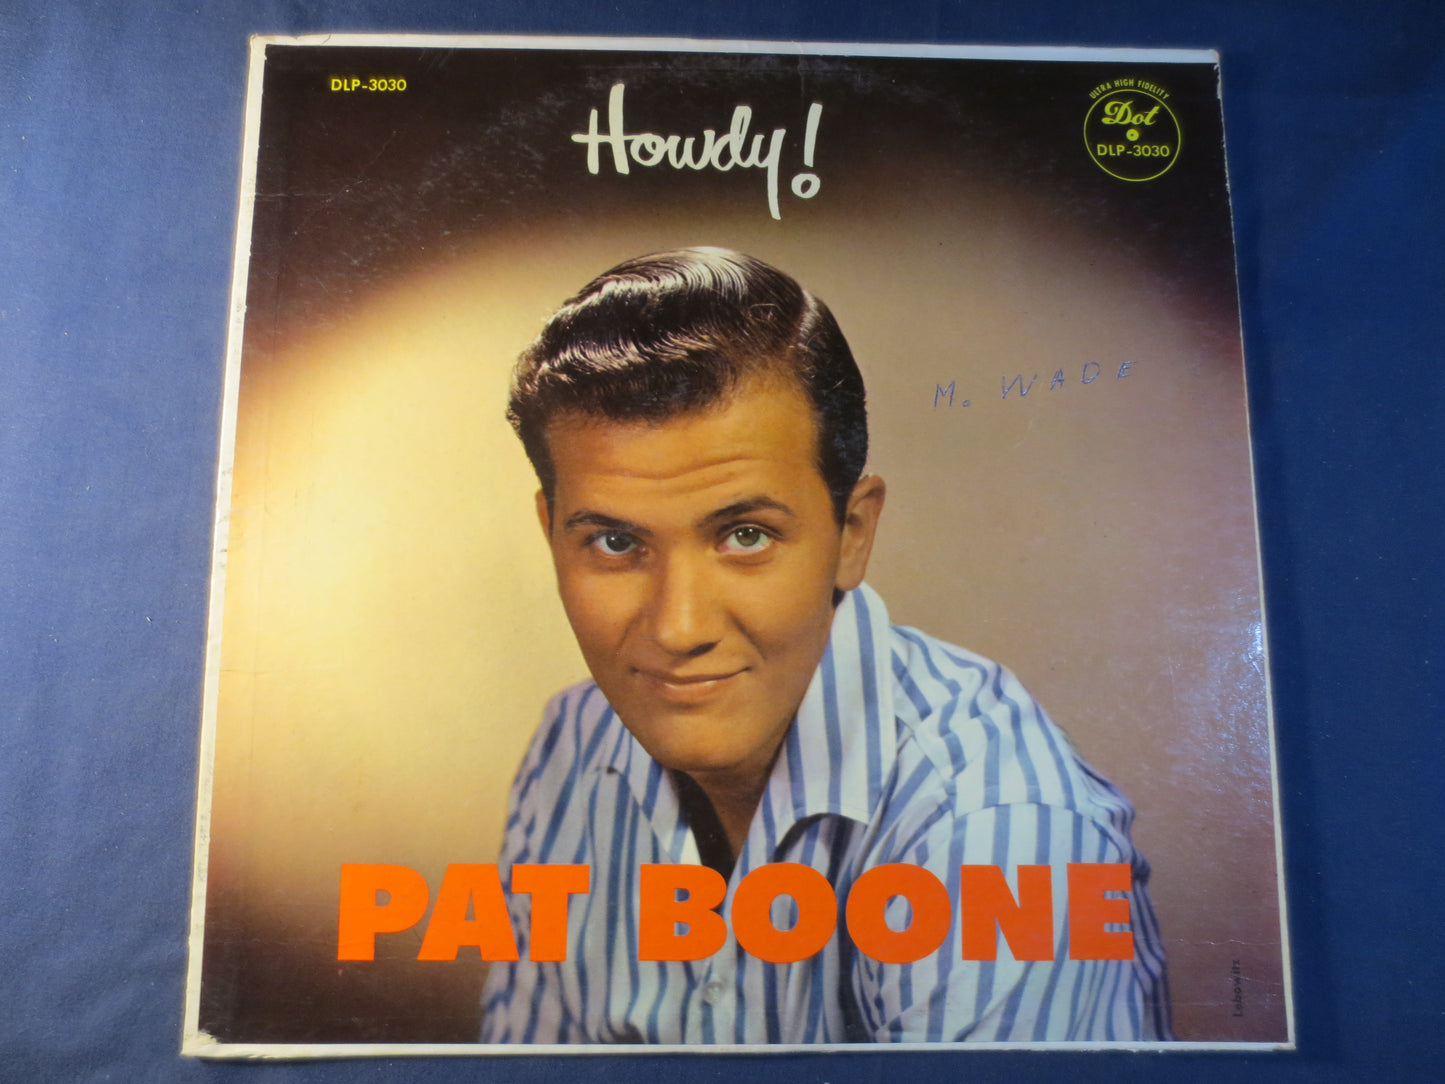 PAT BOONE, 1st ALBUM, Howdy, Debut Record, Vintage Vinyl, Record Vinyl, Records, Vinyl Records, Pop Records, 1956 Records